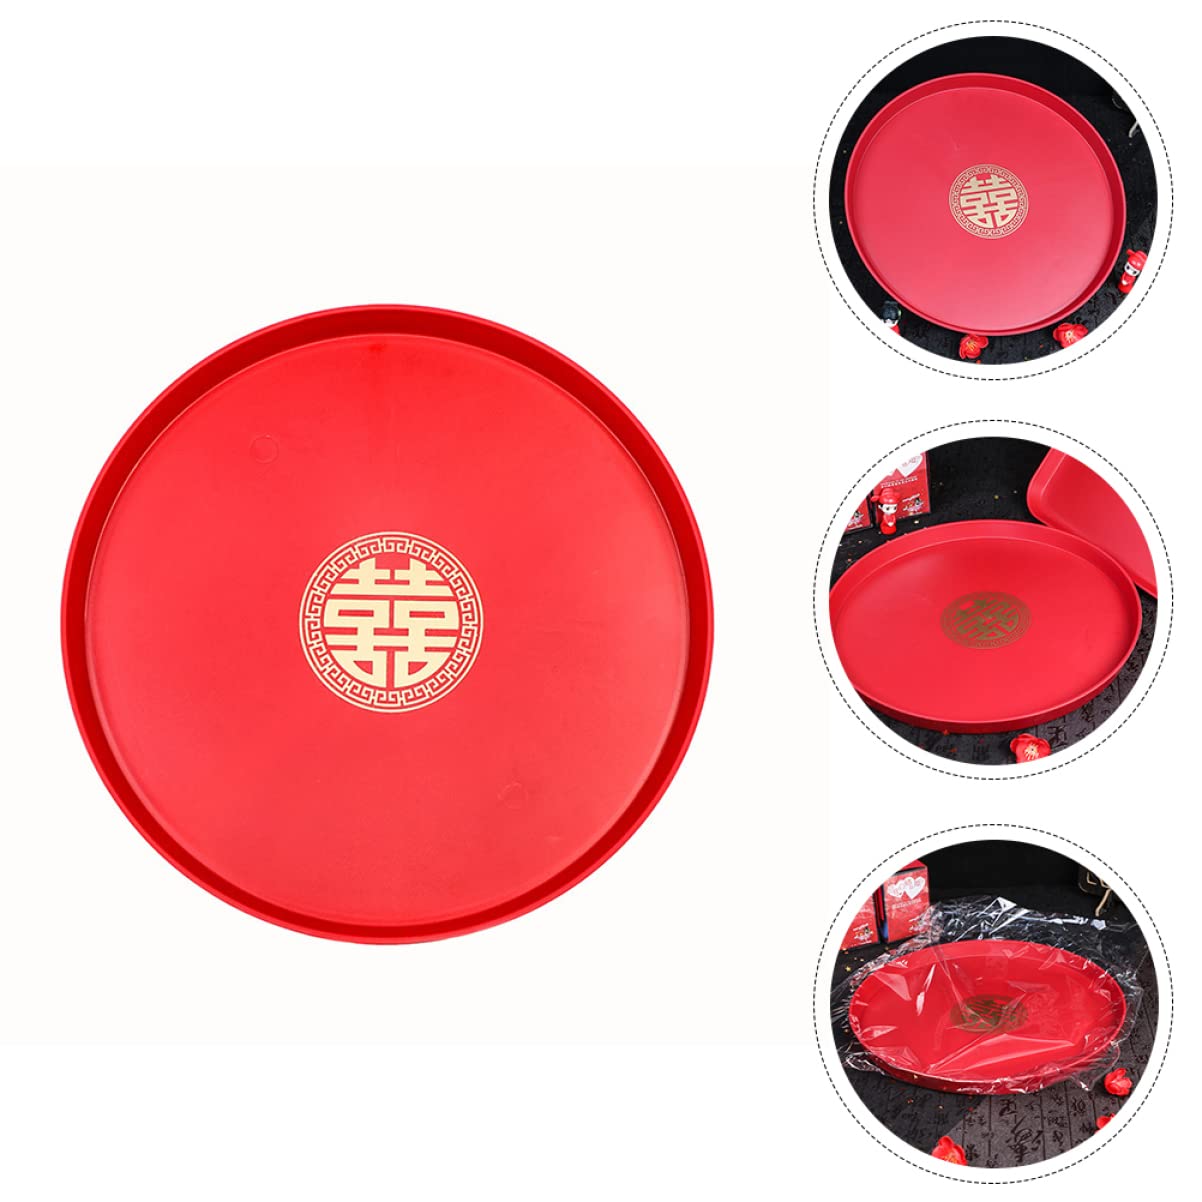 Cabilock 2 pieces Chinese Wedding Serving chinese new year snack tray chinese new year platter chinese new year candy tray Tray Platter: Red